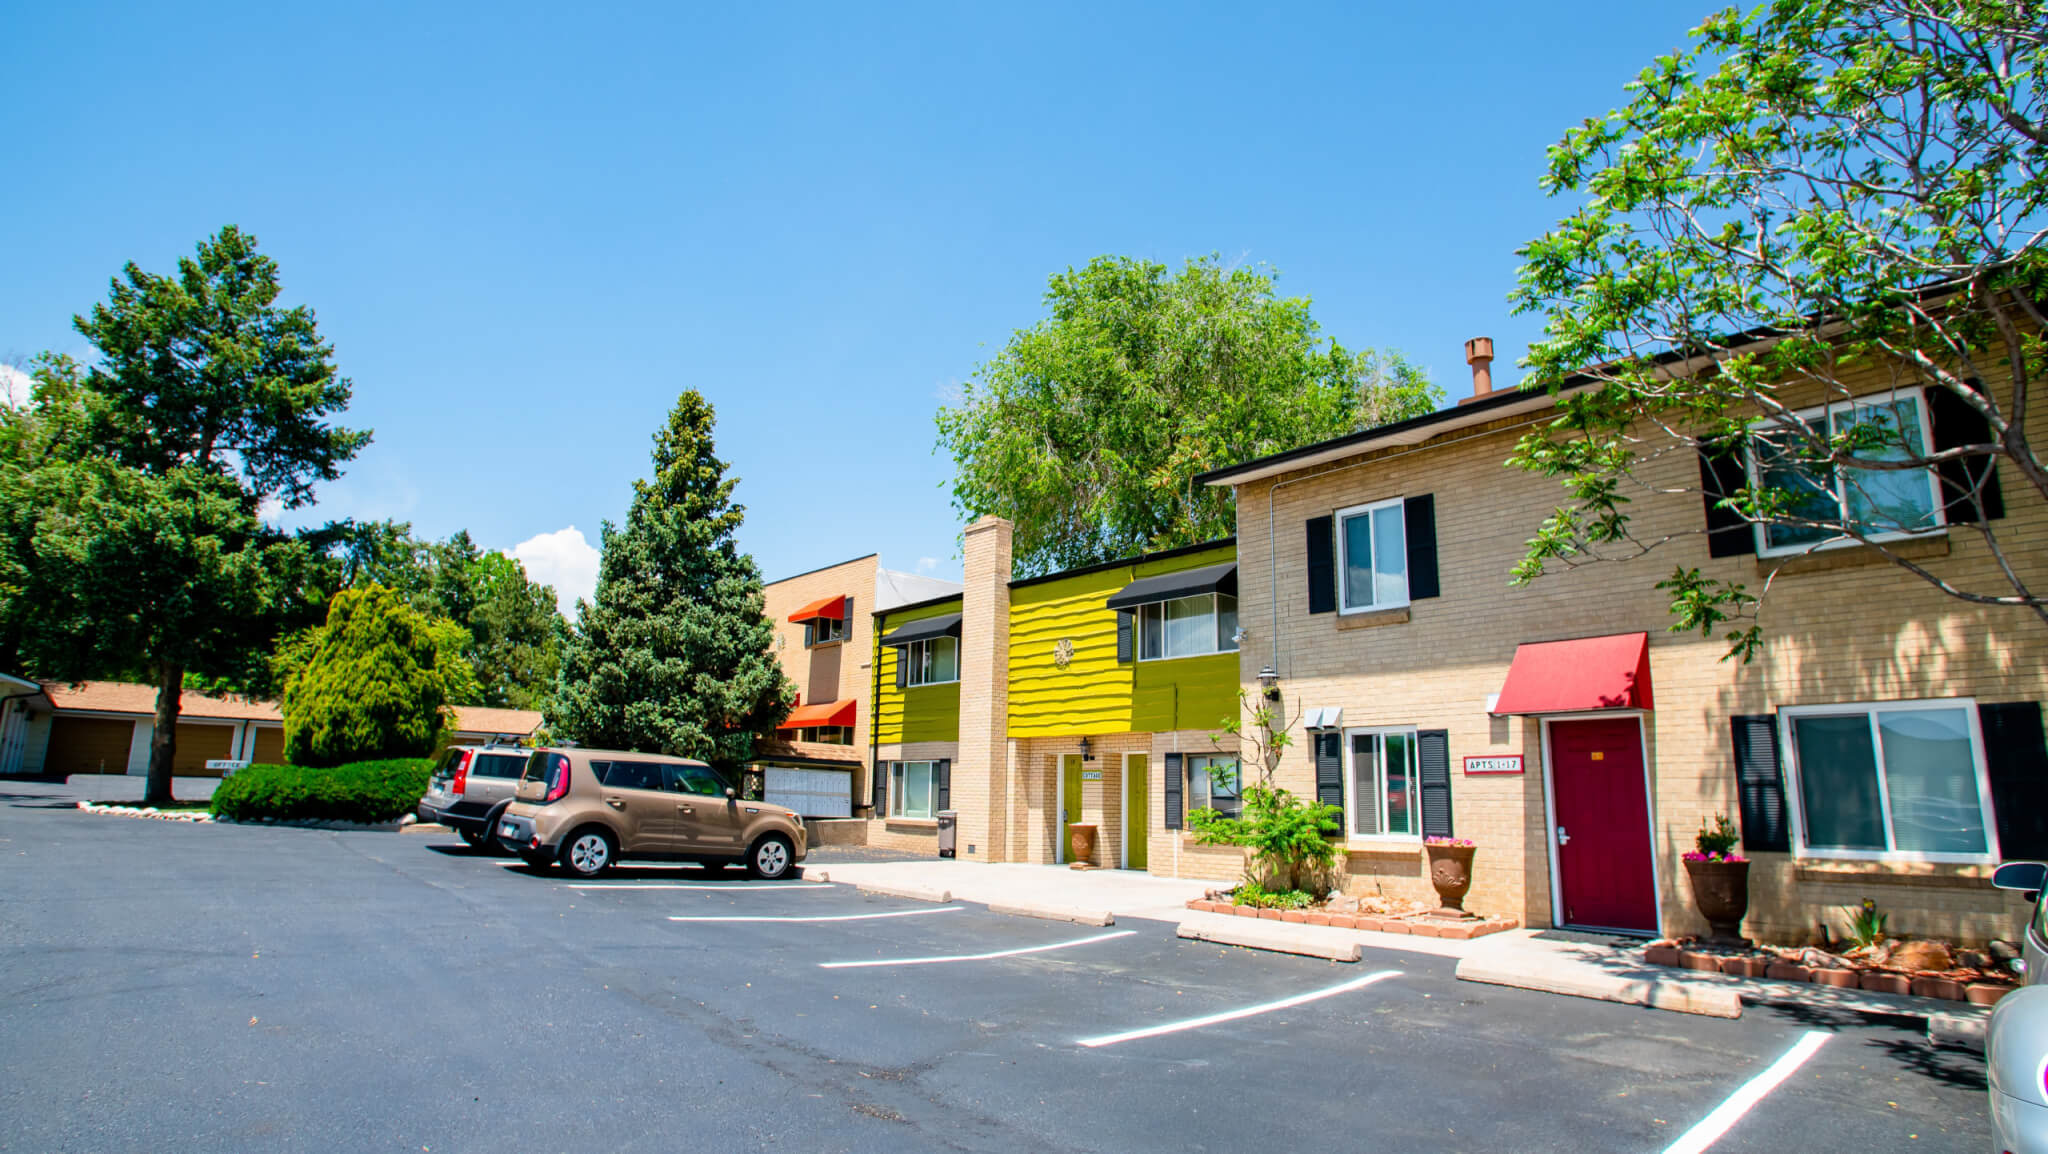 Just Sold: 25 Unit Lakewood Building Sells for $4.085M